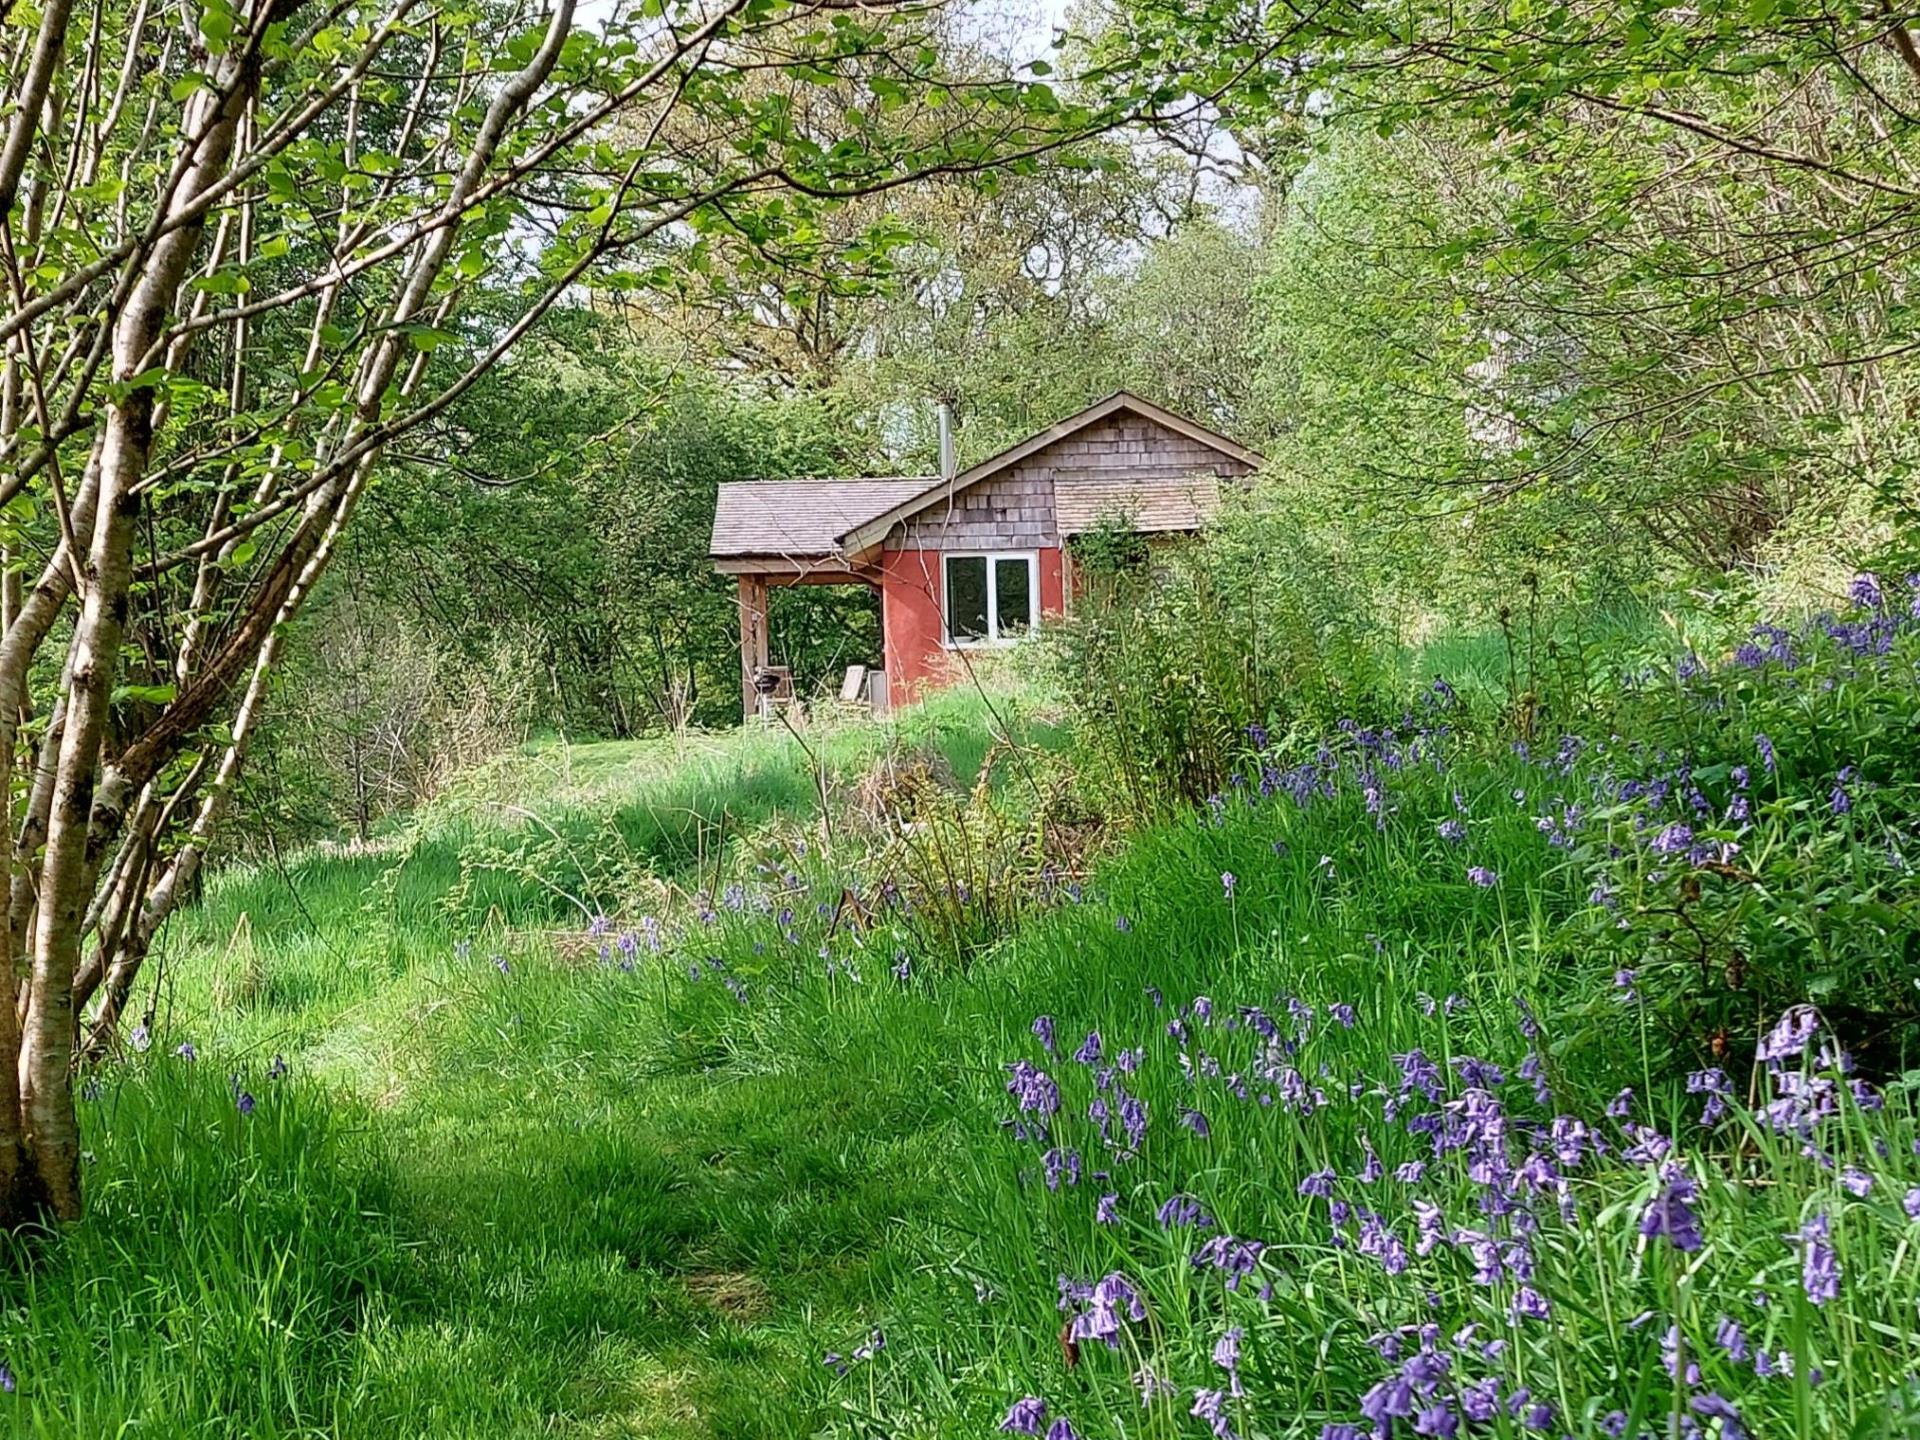 A bluebell path by the Straw cottage